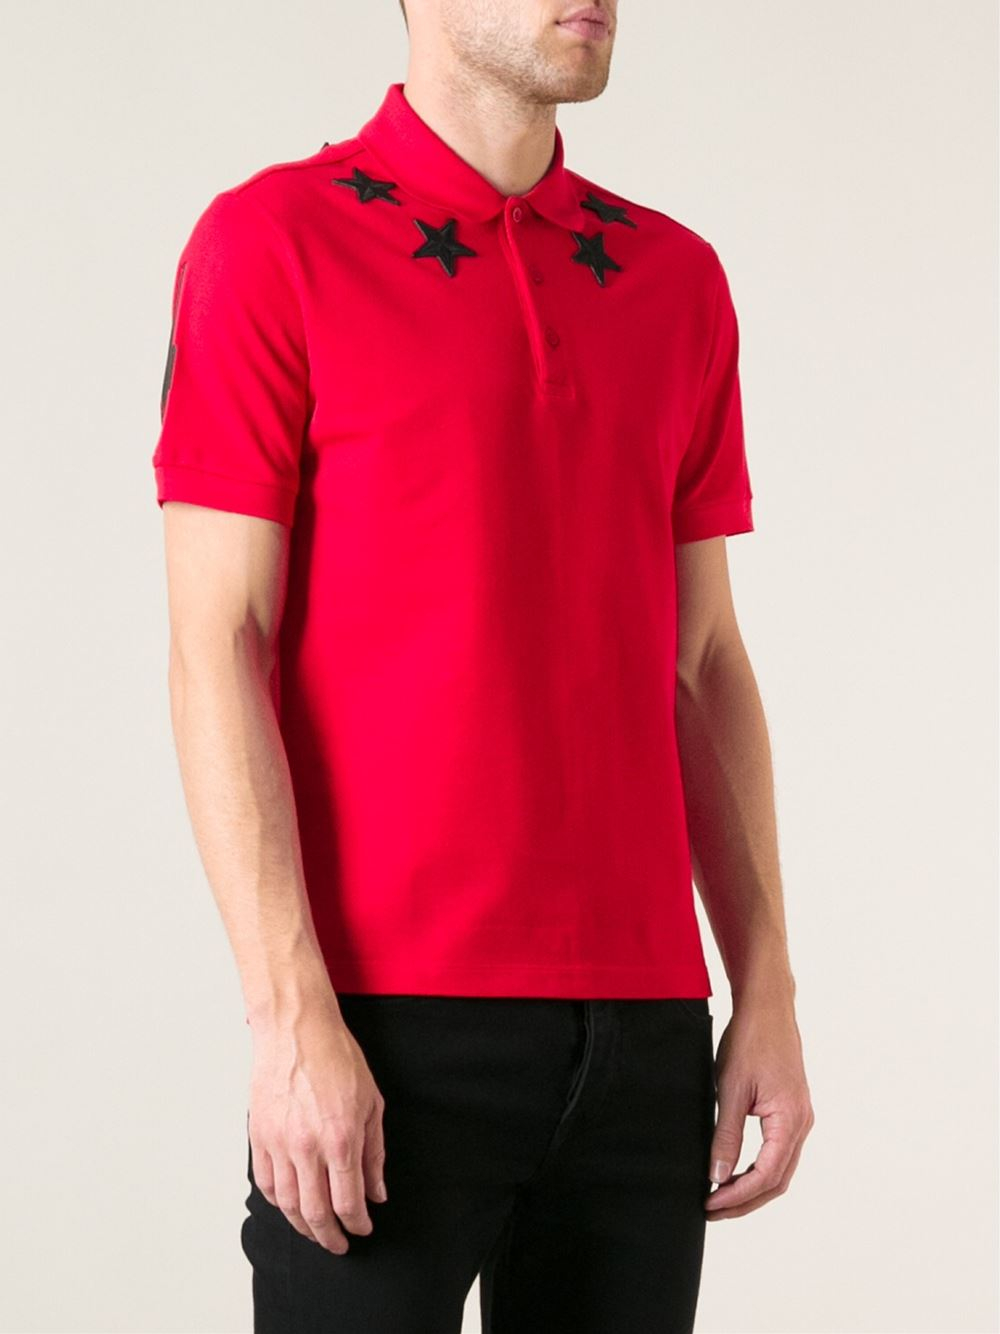 givenchy polo red